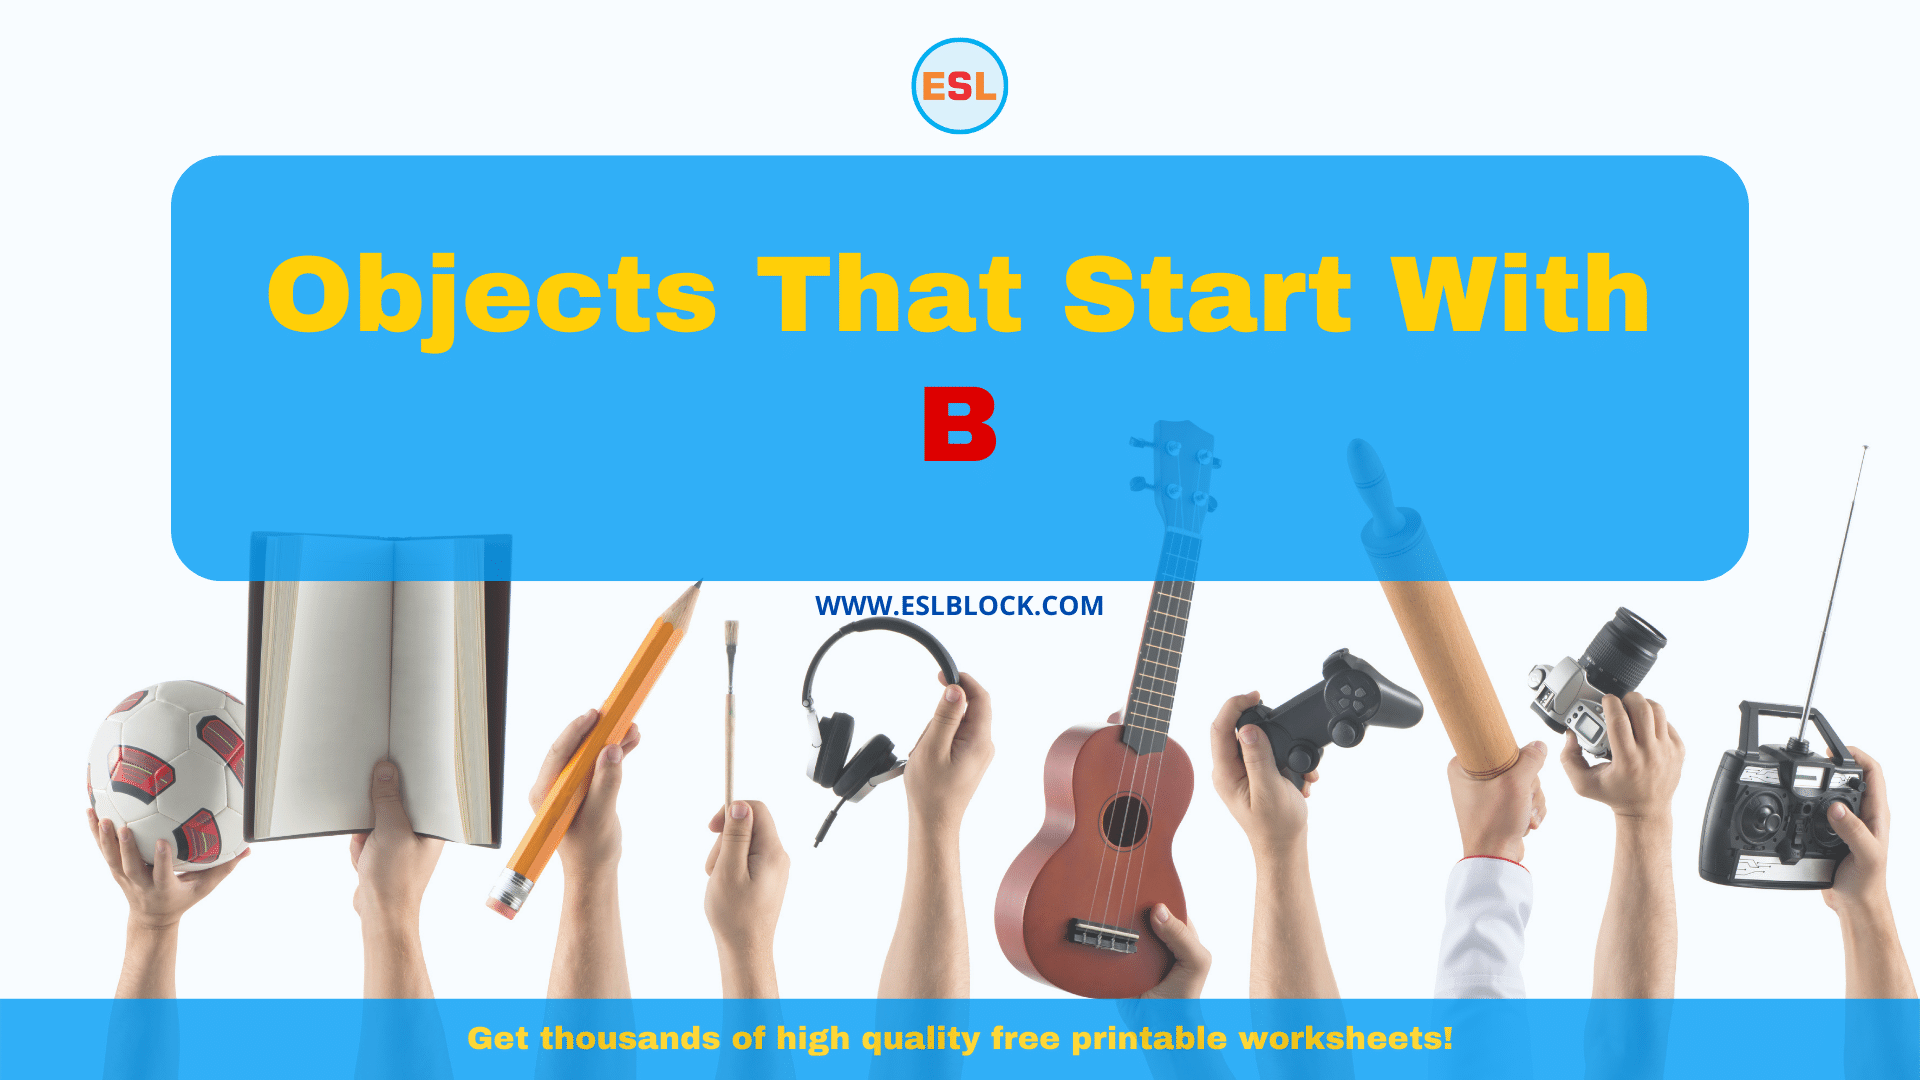 5 Letter Objects Starting With B, B Objects, B Objects in English, B Objects Names, English, English Nouns, English Vocabulary, English Words, List of Objects That Start With ZZ, Nouns, Objects List, Objects That Start With B, Things Names, Vocabulary